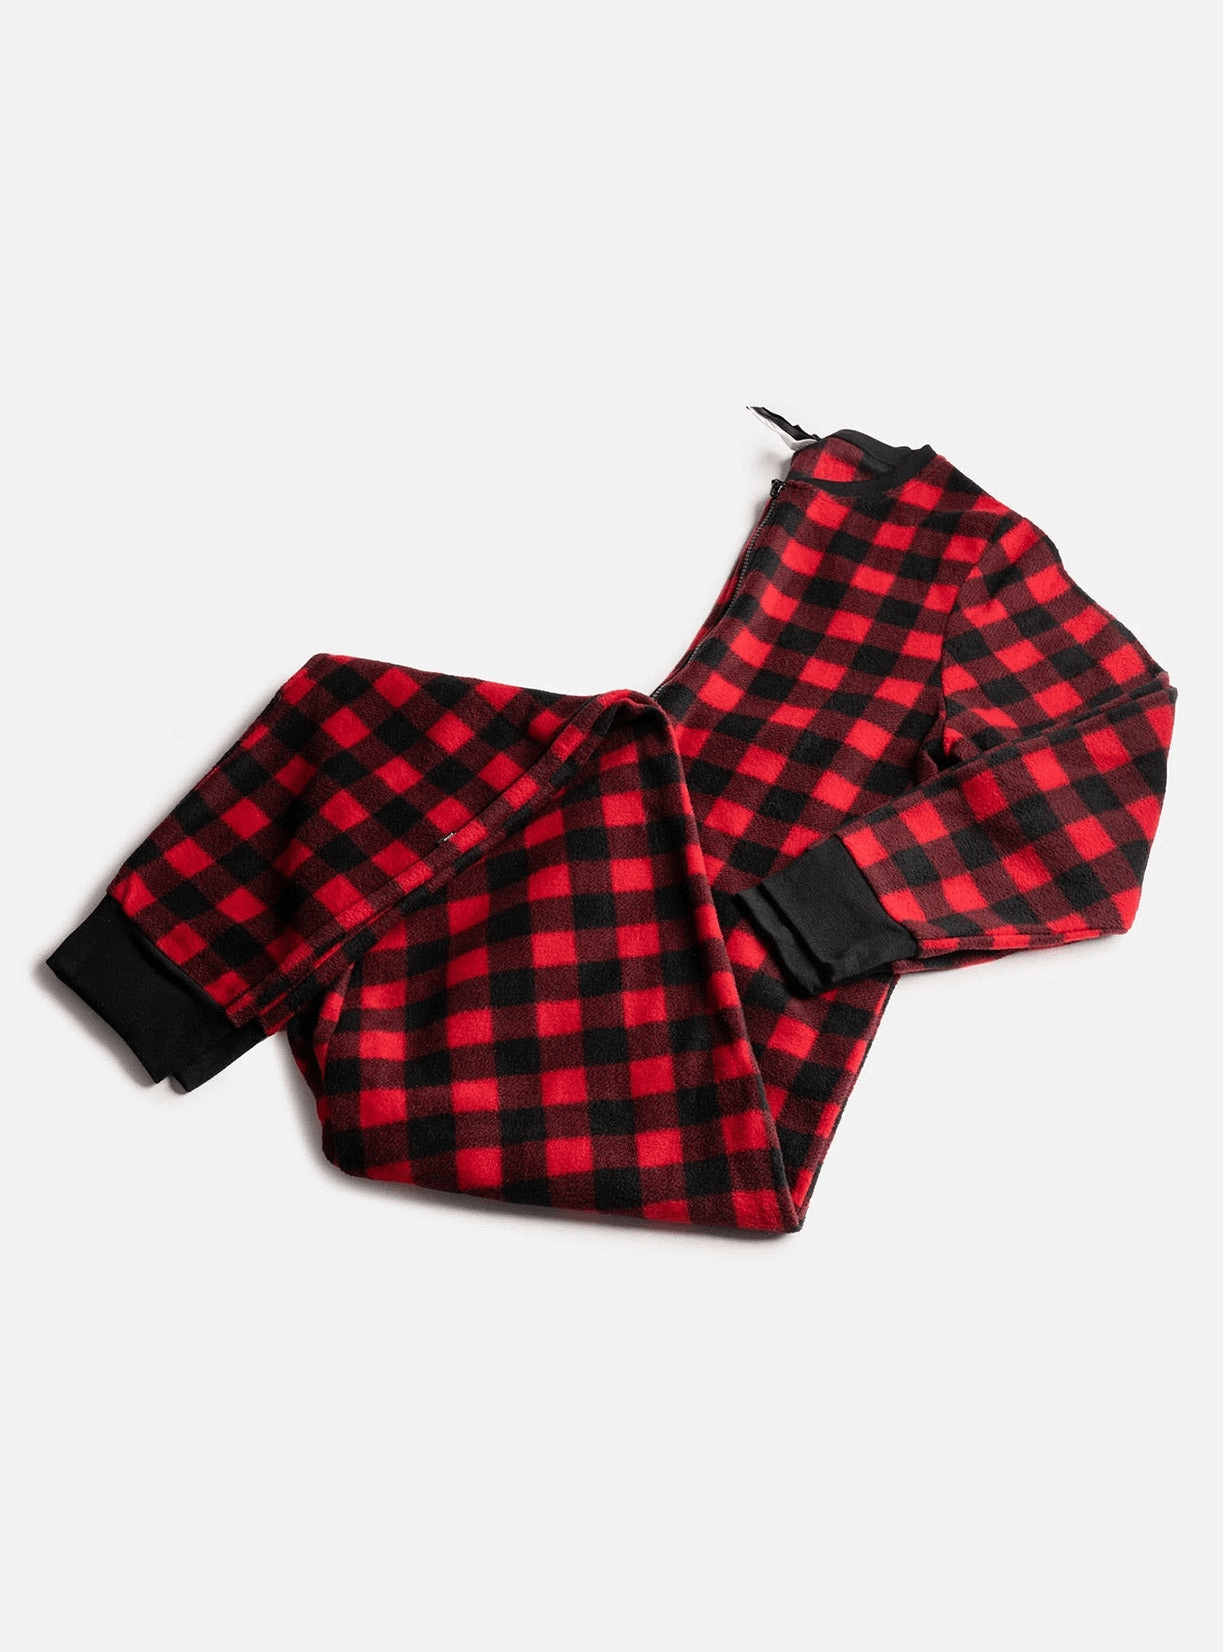 Dog and Pet Stuff Default Buy One Dog Onesie Plaid Red Get Free Human Matching